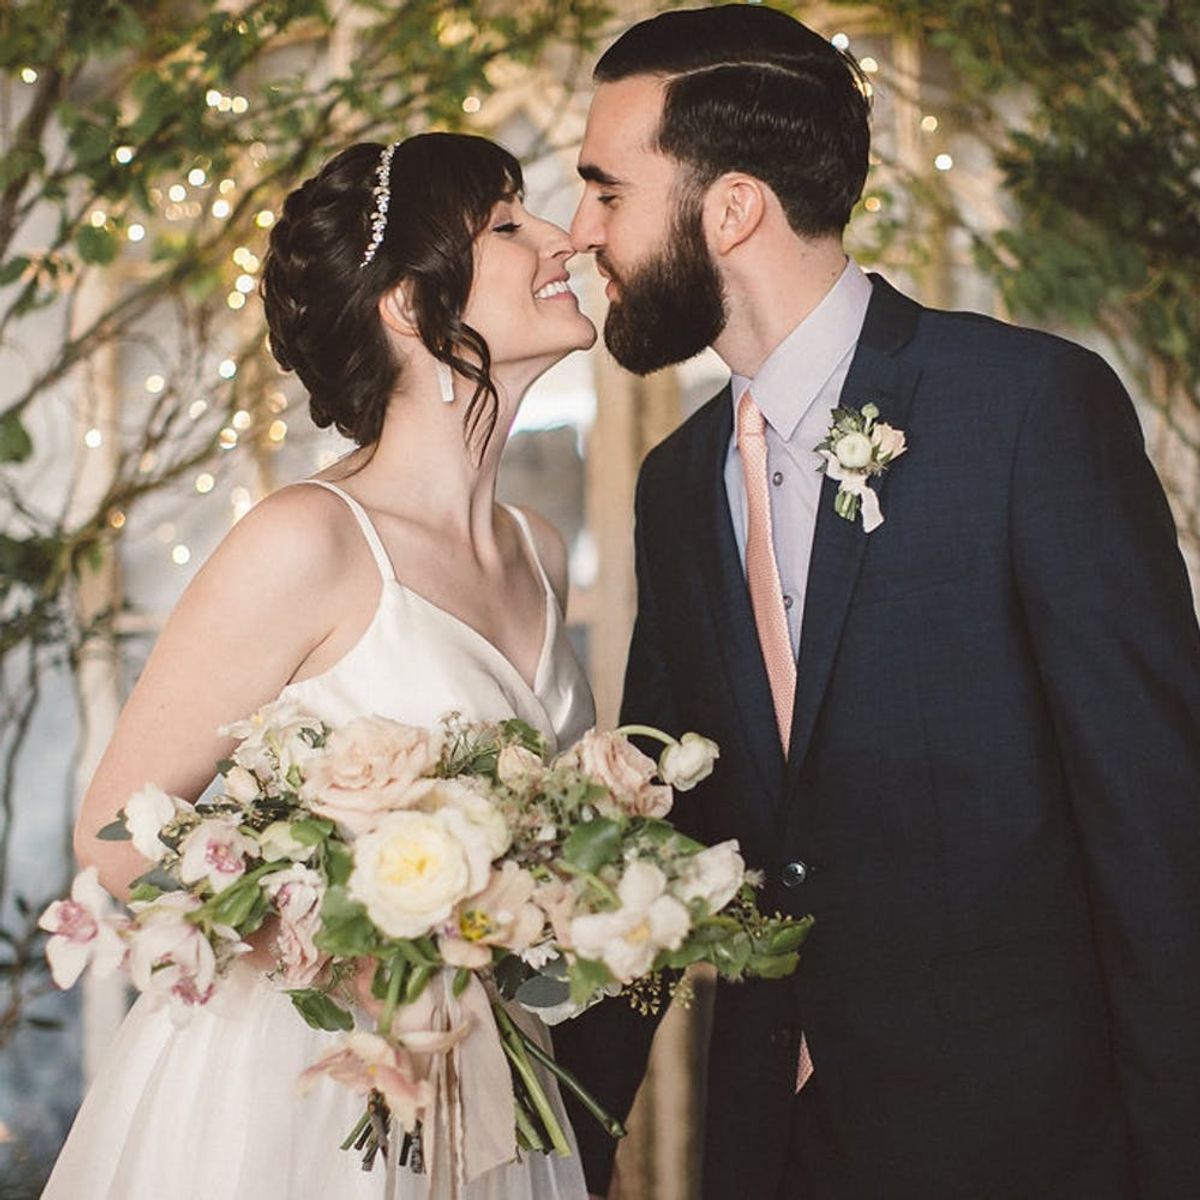 Get Ready to Swoon Over This Ethereal Garden-Inspired Wedding Shoot